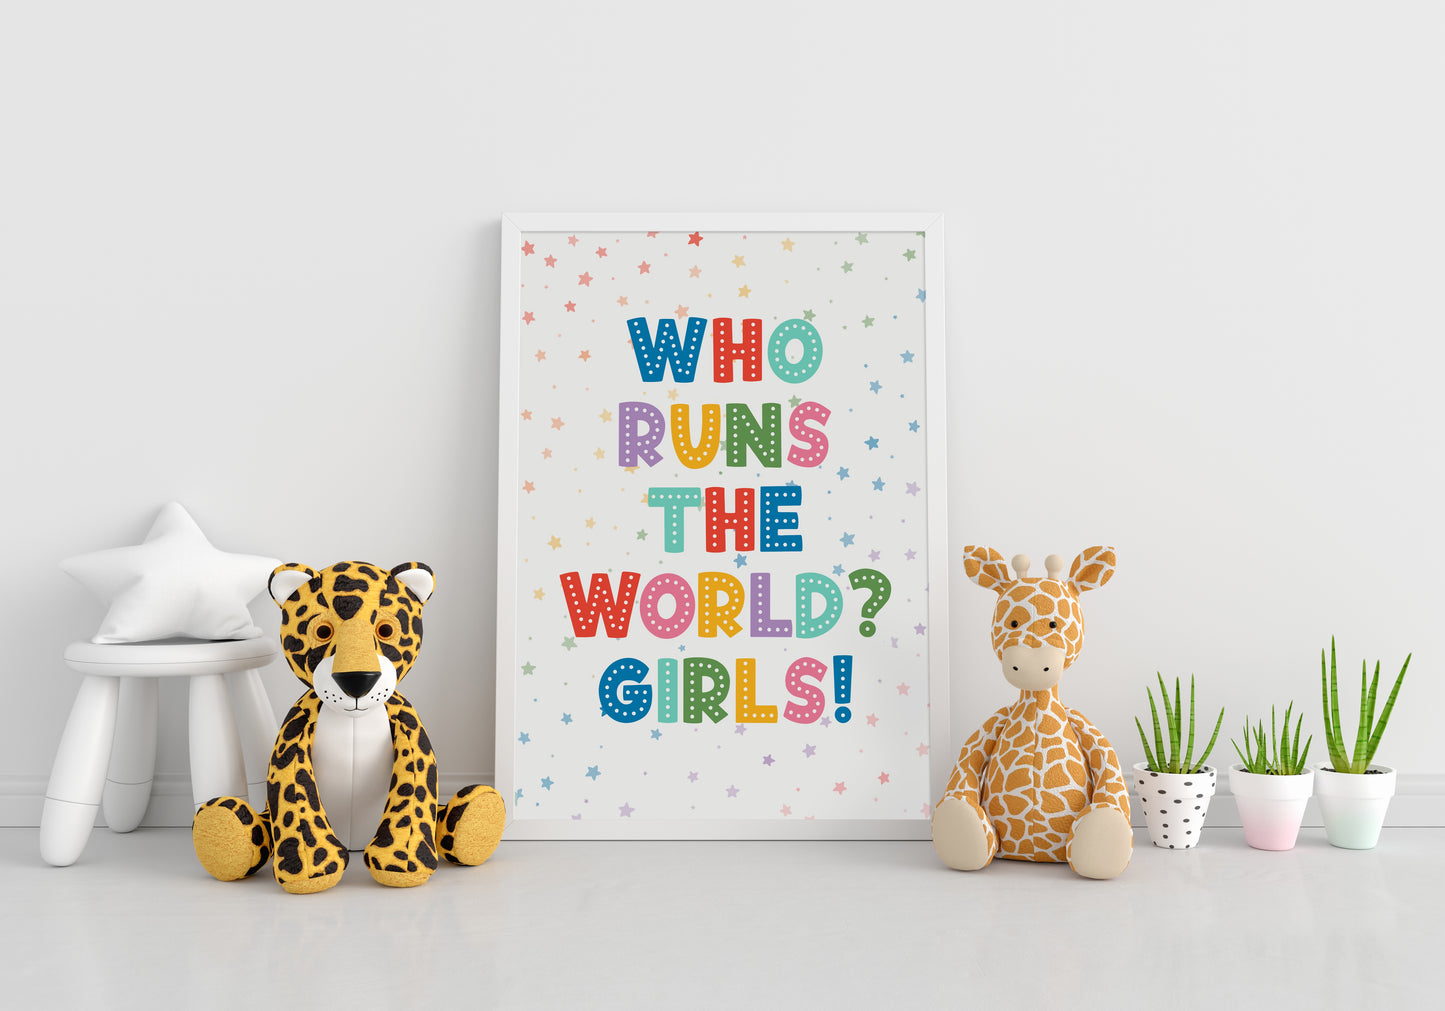 Who Runs The World? Girls! Print with White Background